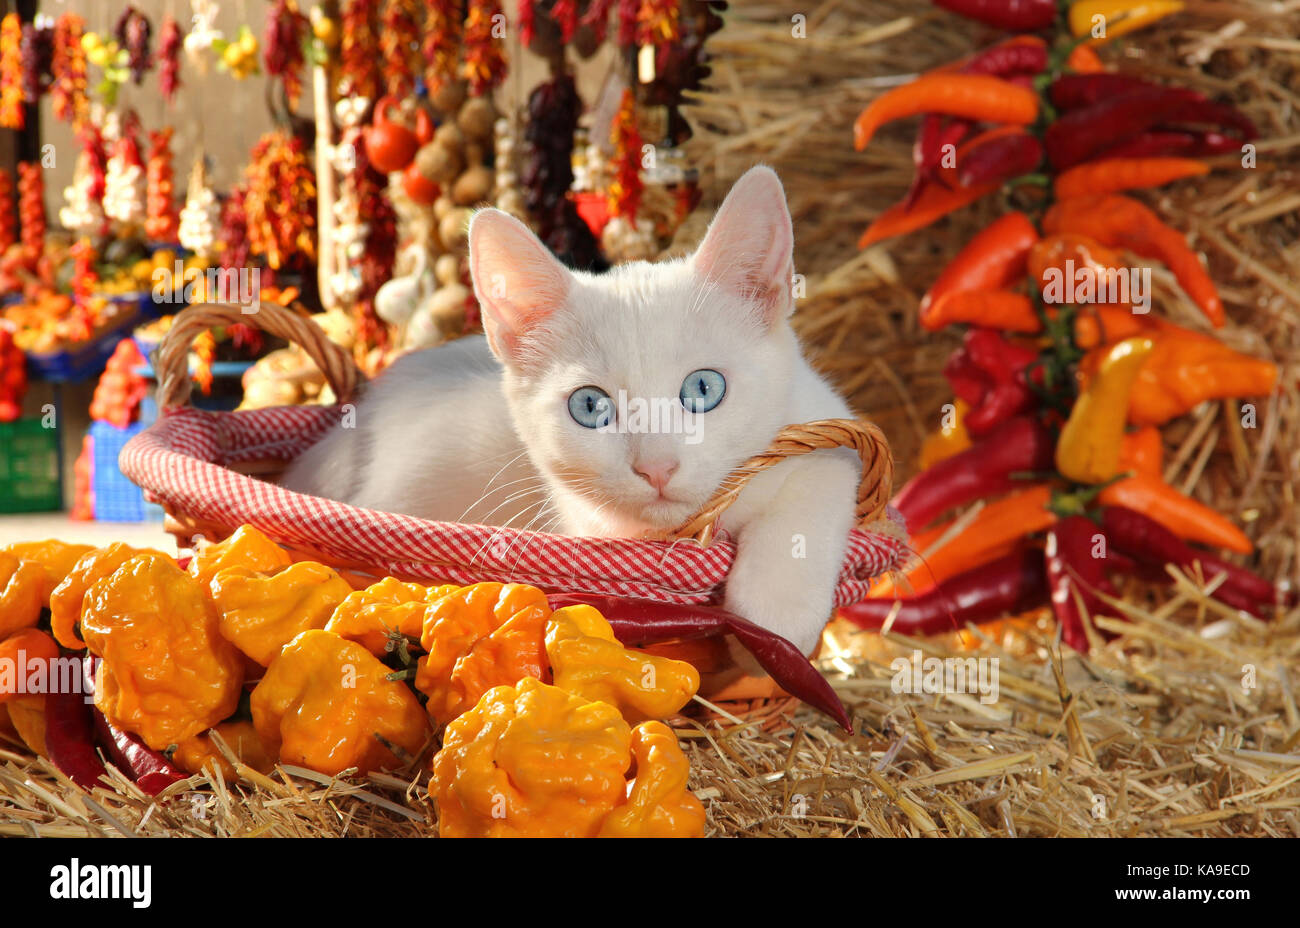 domestic cat, white, blue eyed, lying in a basket between pepperoni garlands Stock Photo